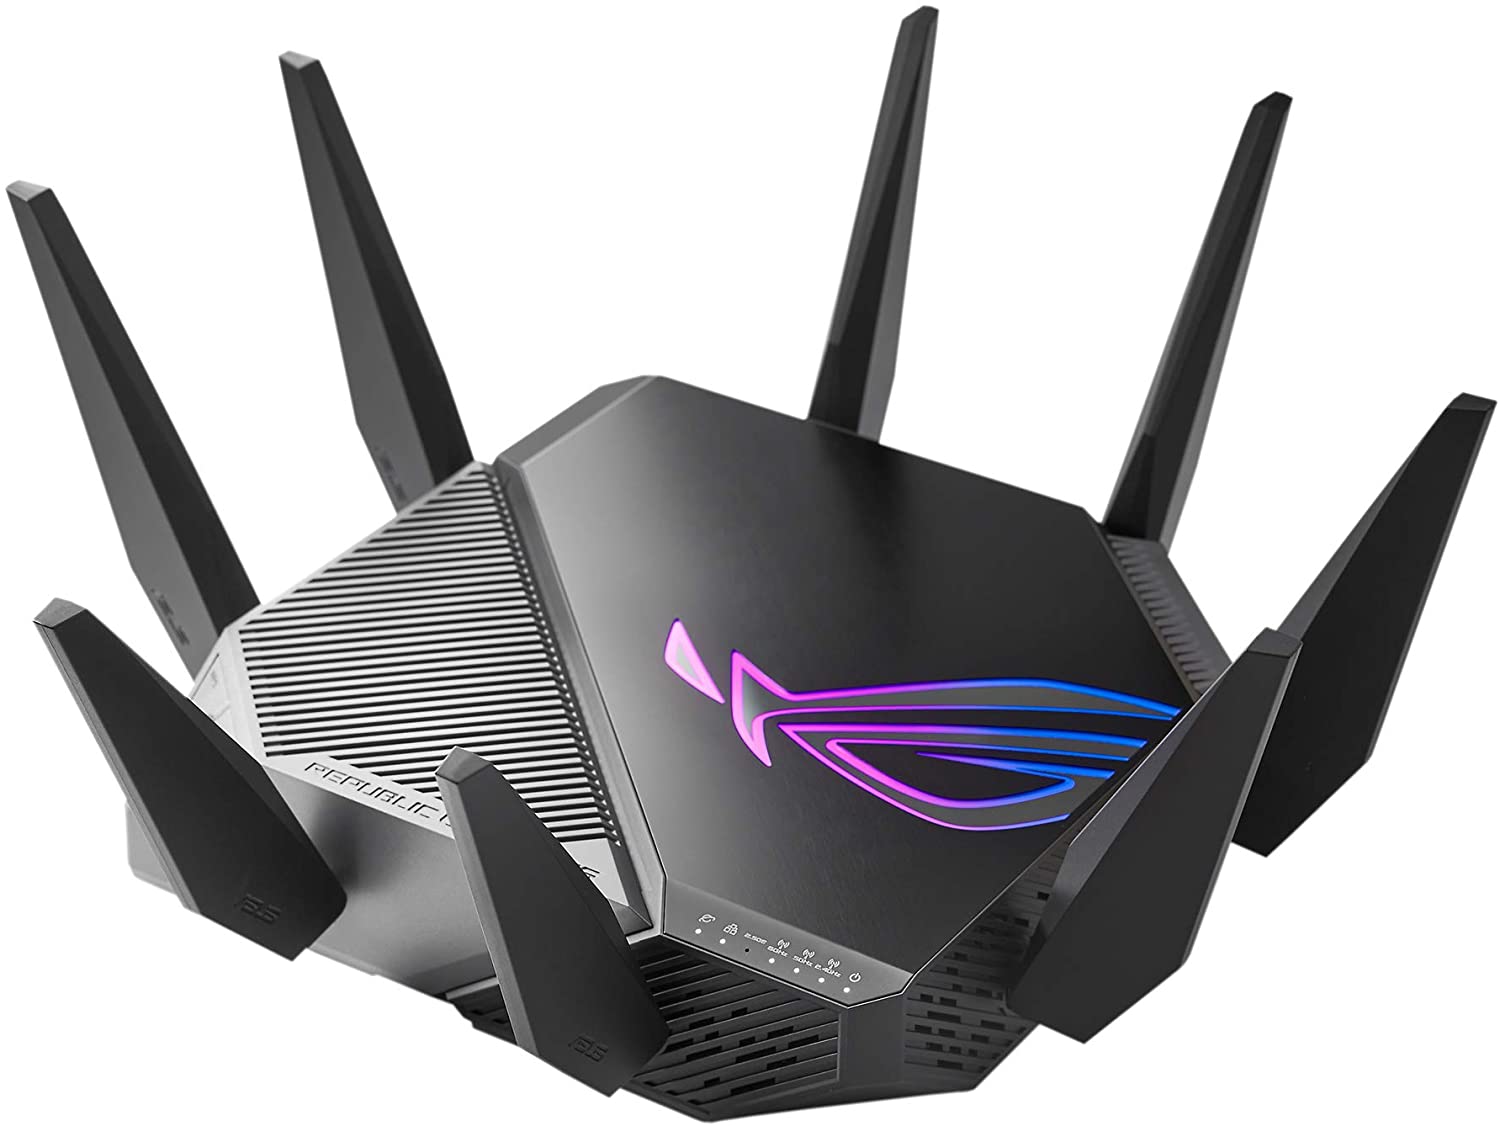 Asus Wifi router